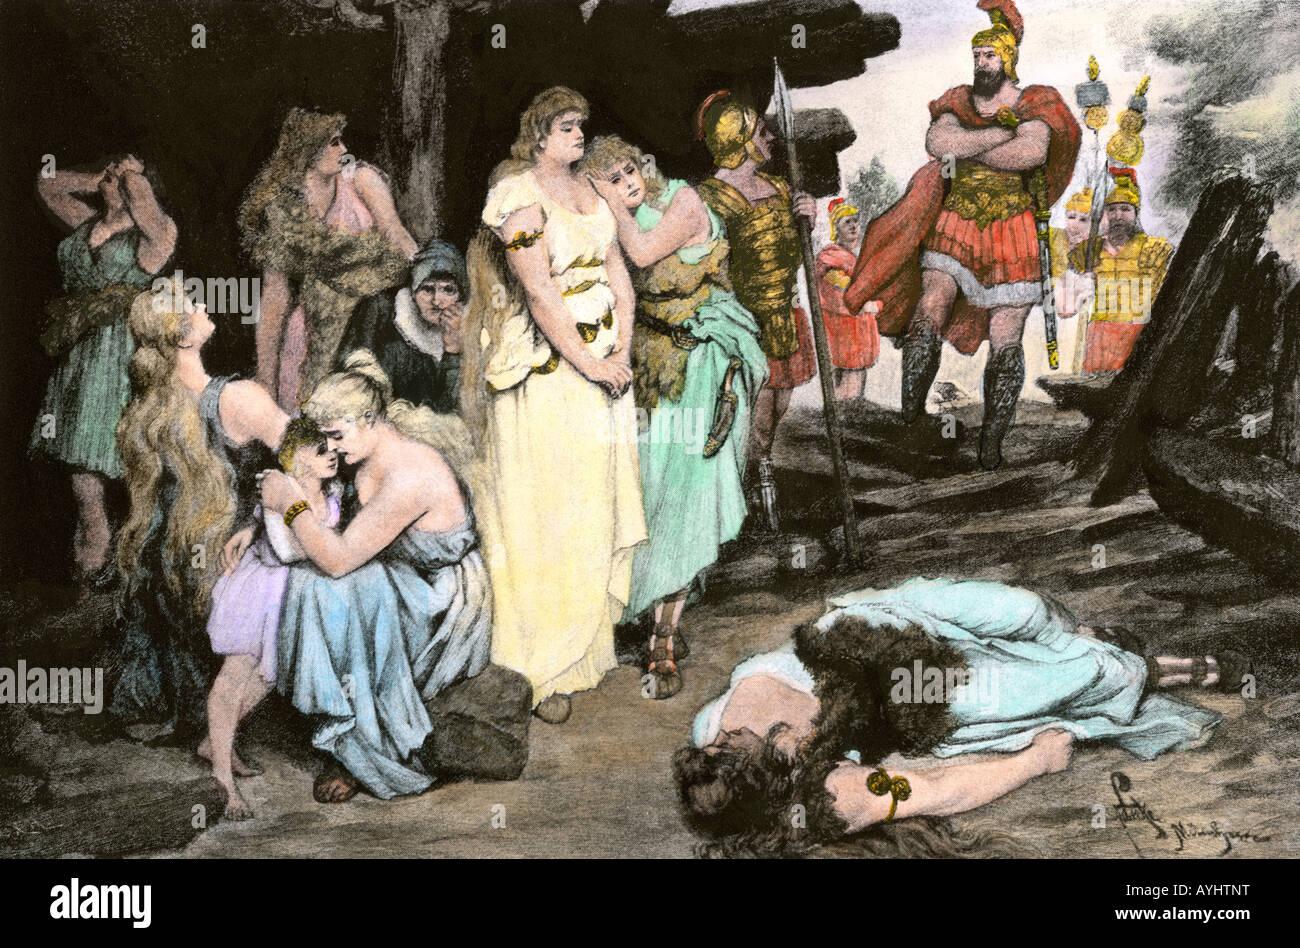 Germanic women captured by Roman army under Julius Caesar. Hand-colored halftone of an illustration Stock Photo